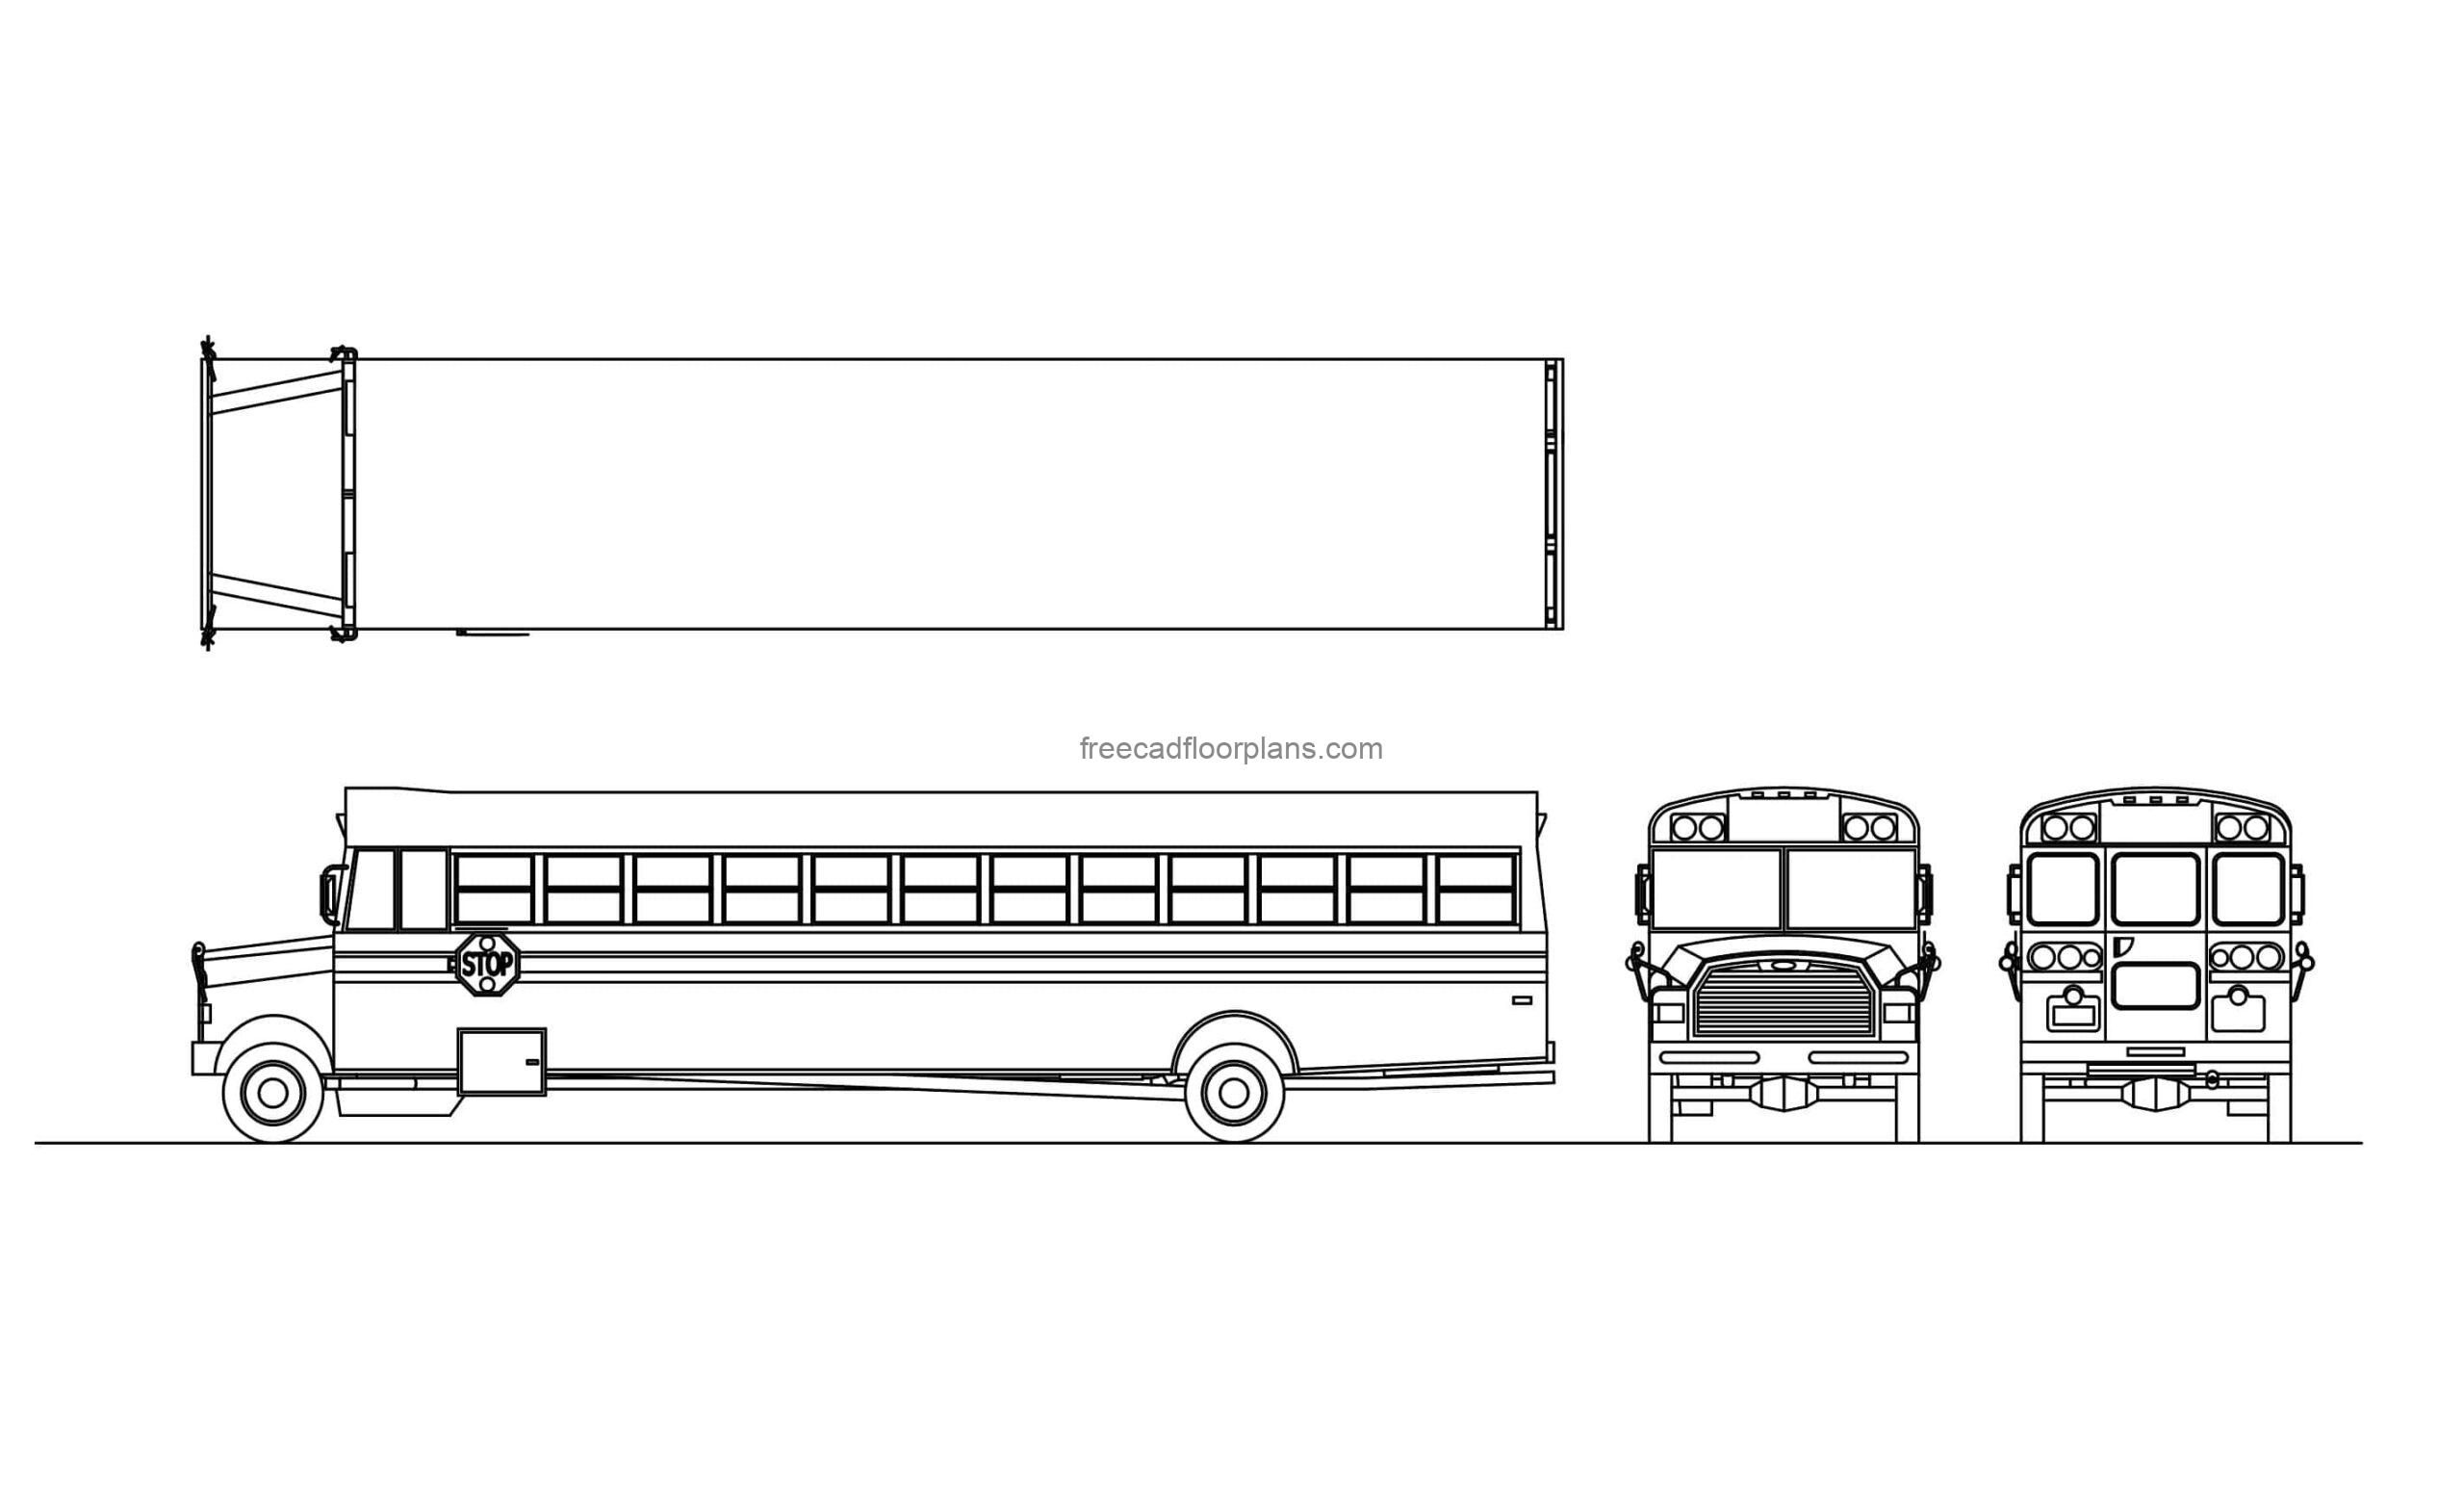 shool bus autocad block drawing, plan and elevations 2d views, dwg file for free download